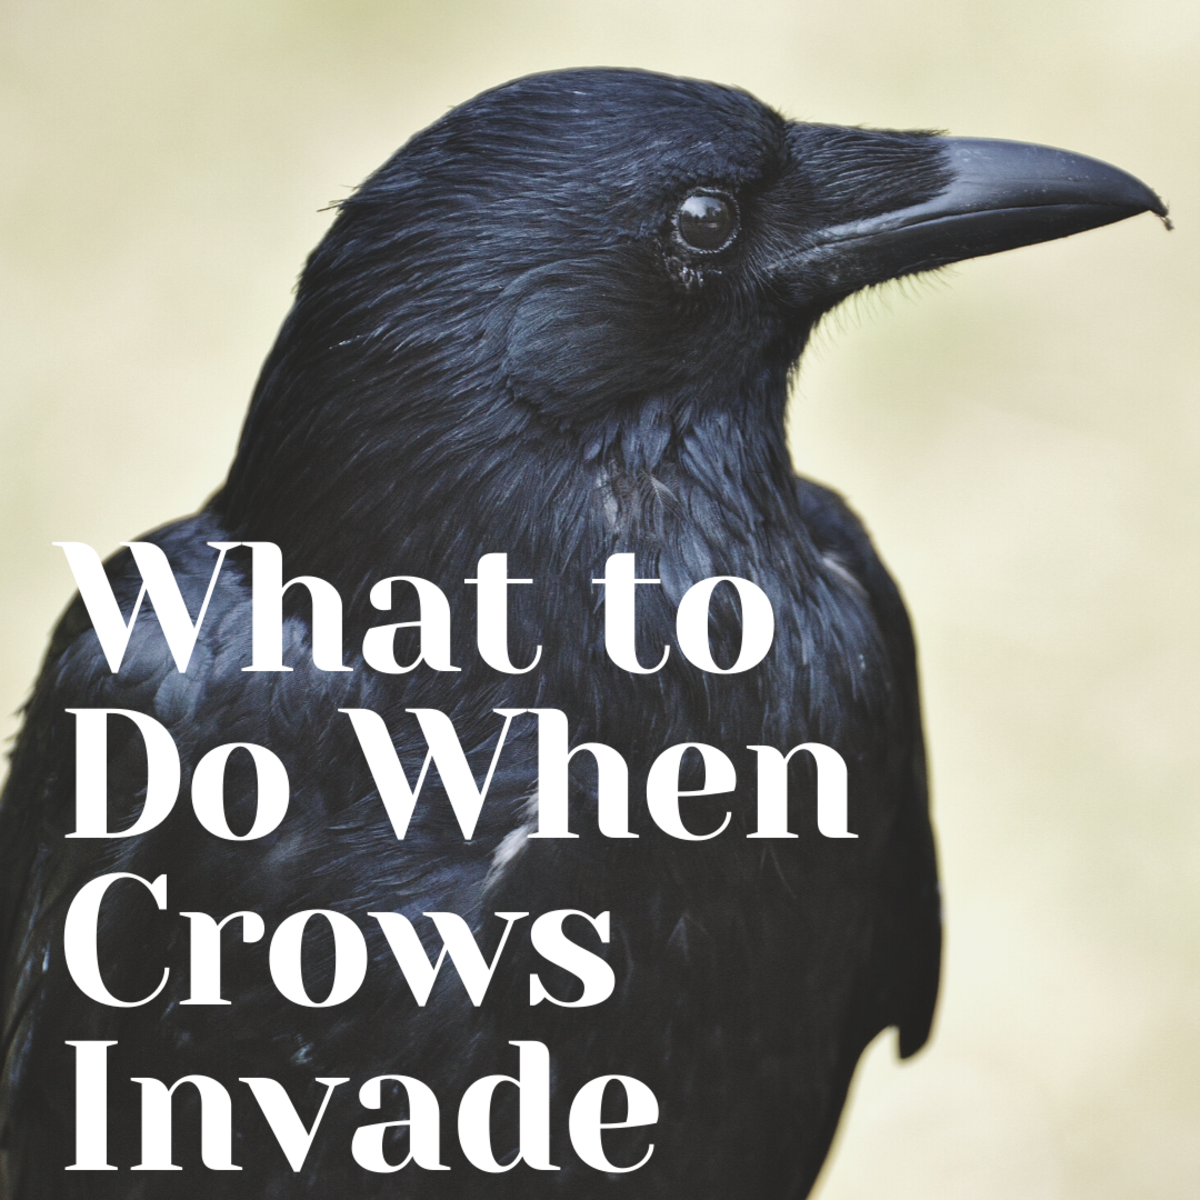 How to Get Rid of Crows in Your Yard or Garden